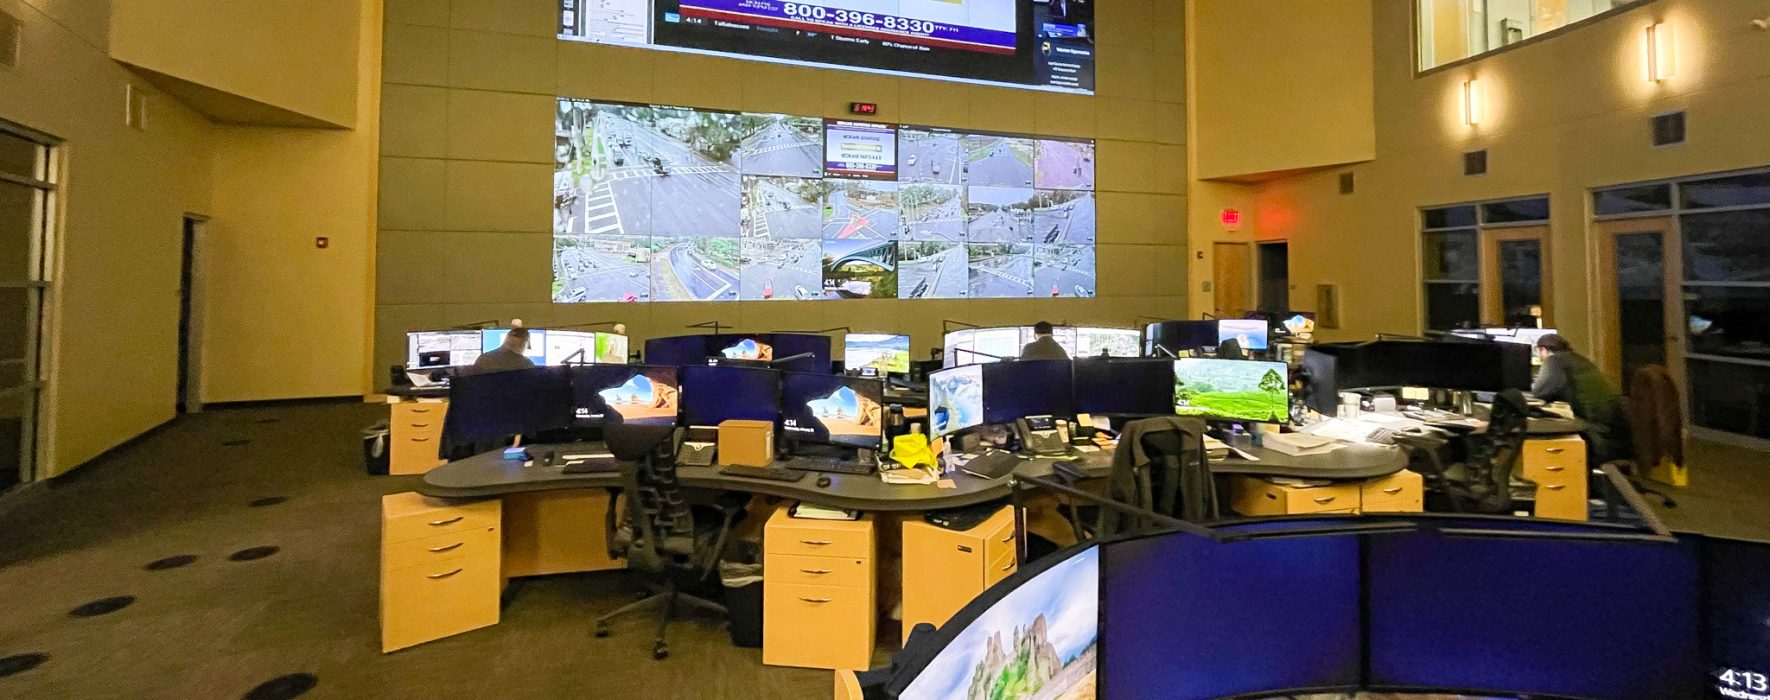 workroom with screens and computers for Tallahassee Advanced Transportation Management System